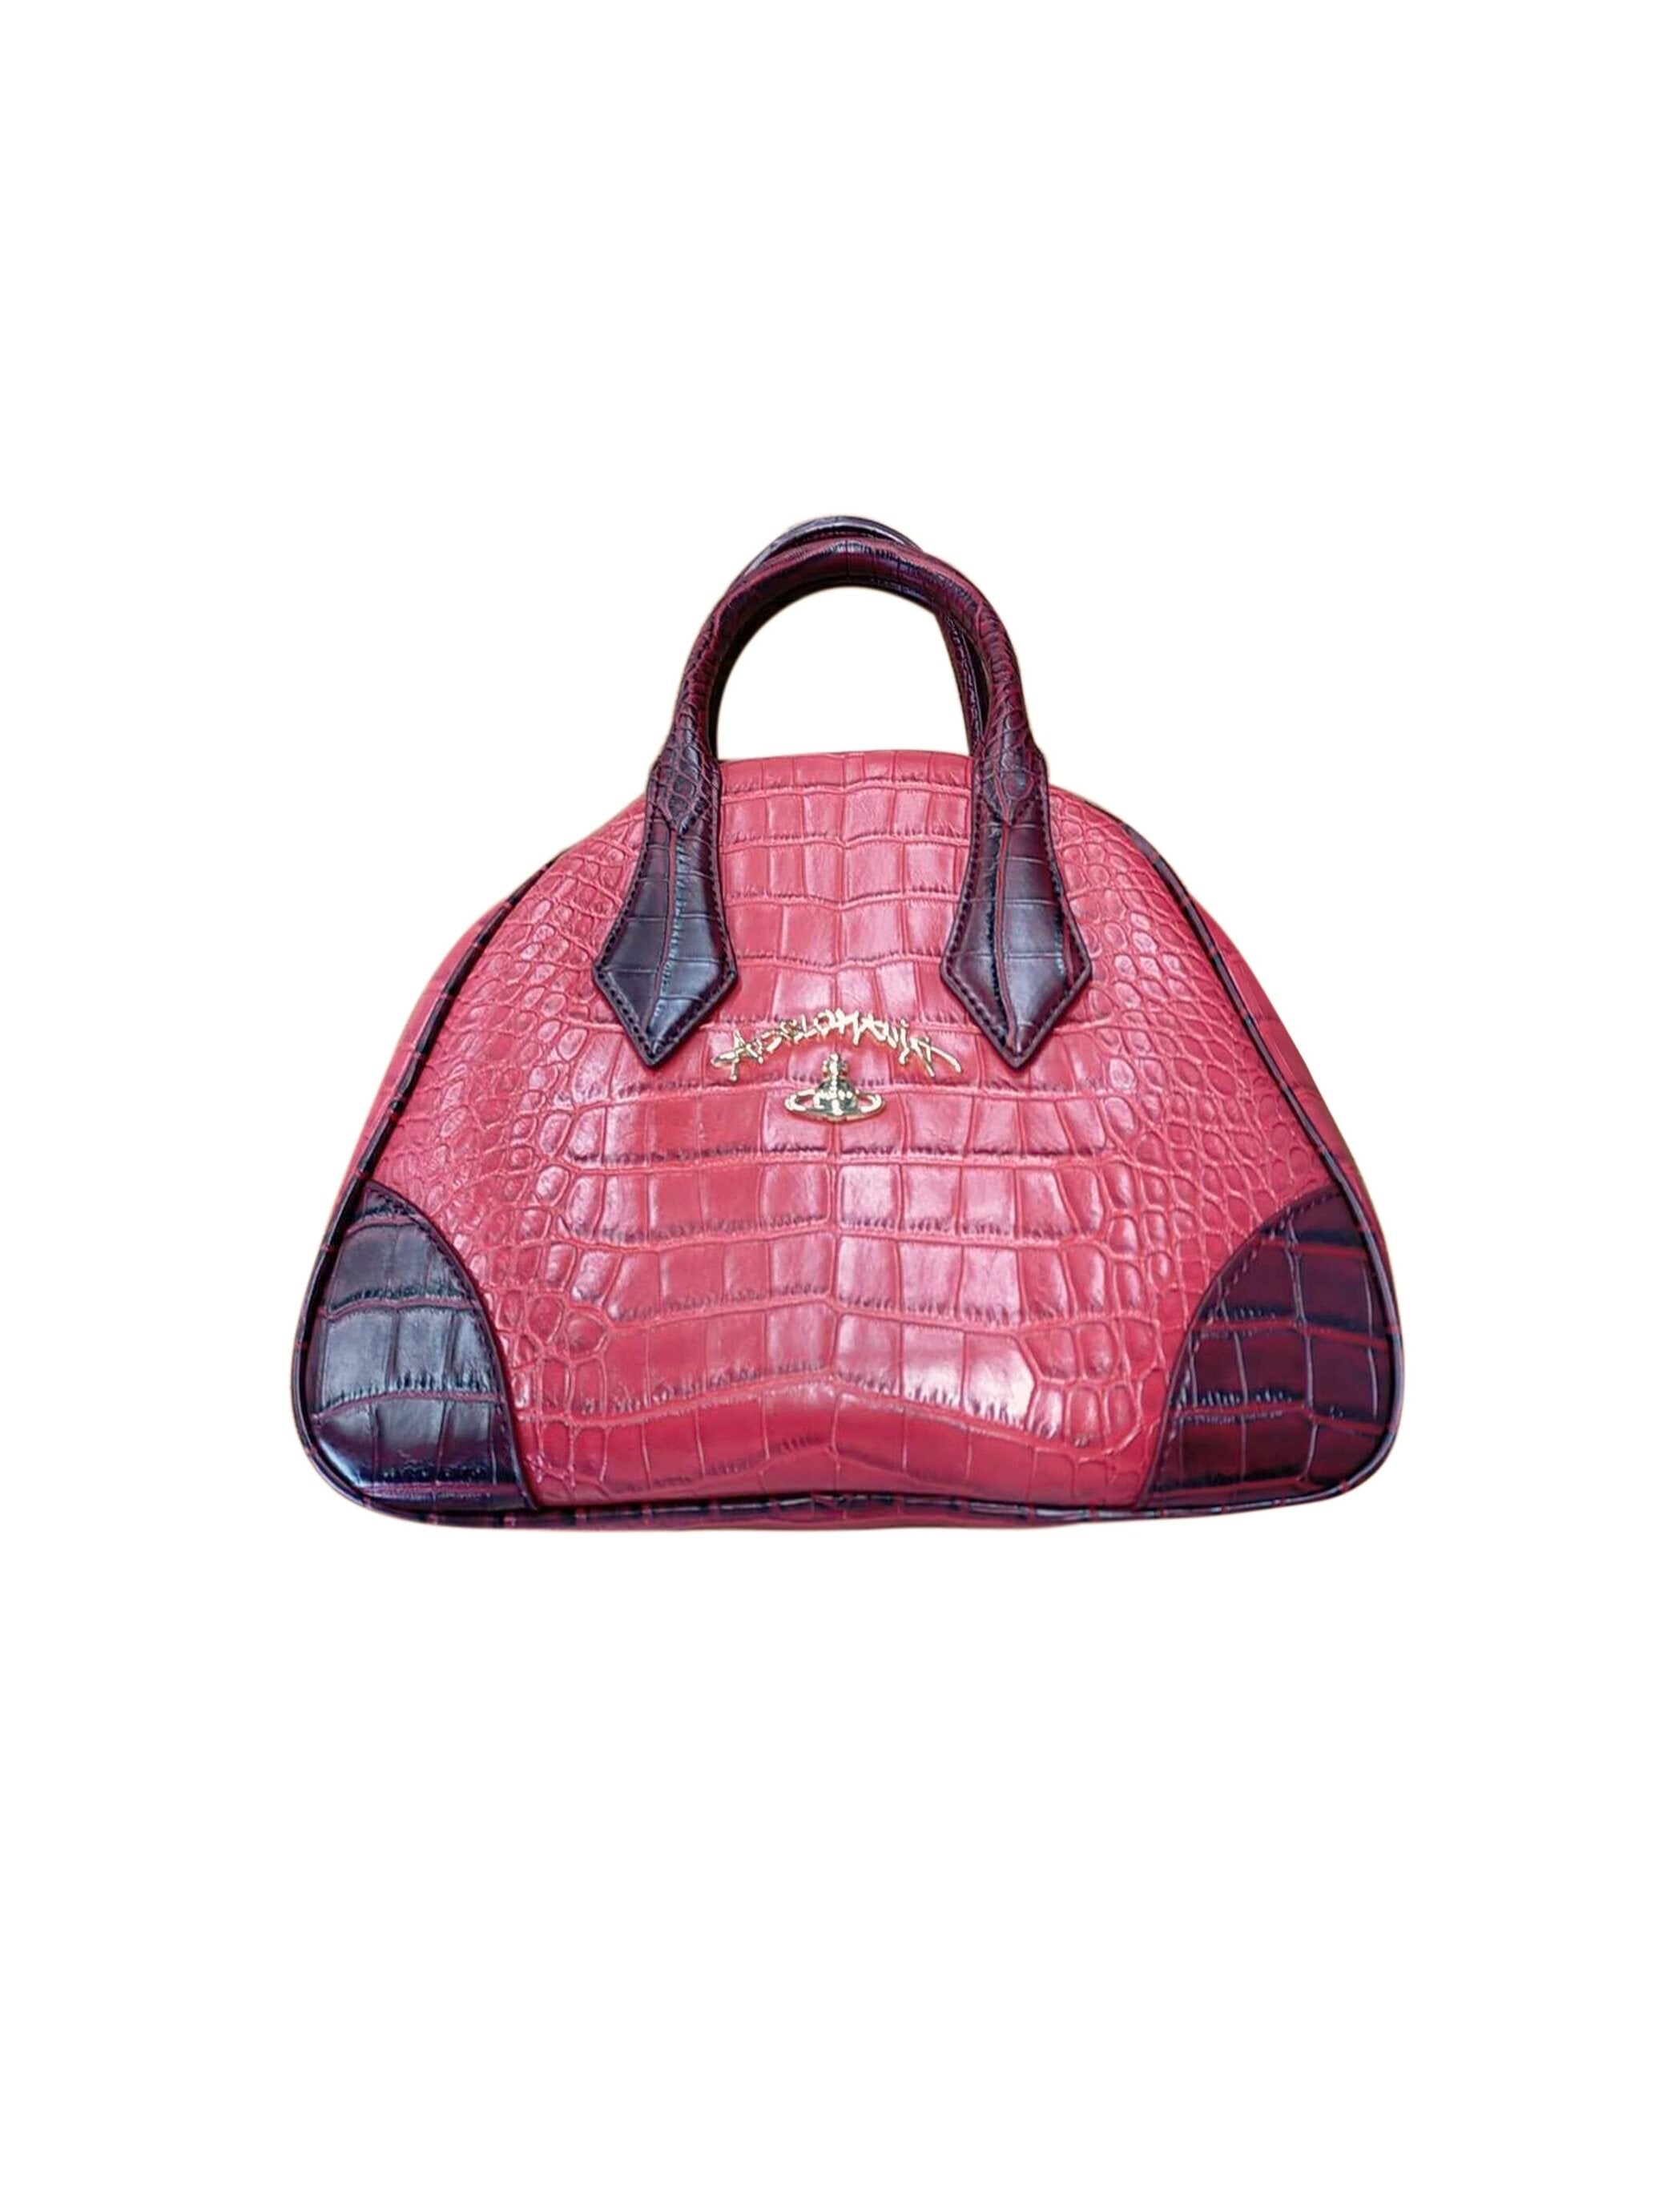 Vivienne Westwood 2000s Python Heart Leather Bag · INTO